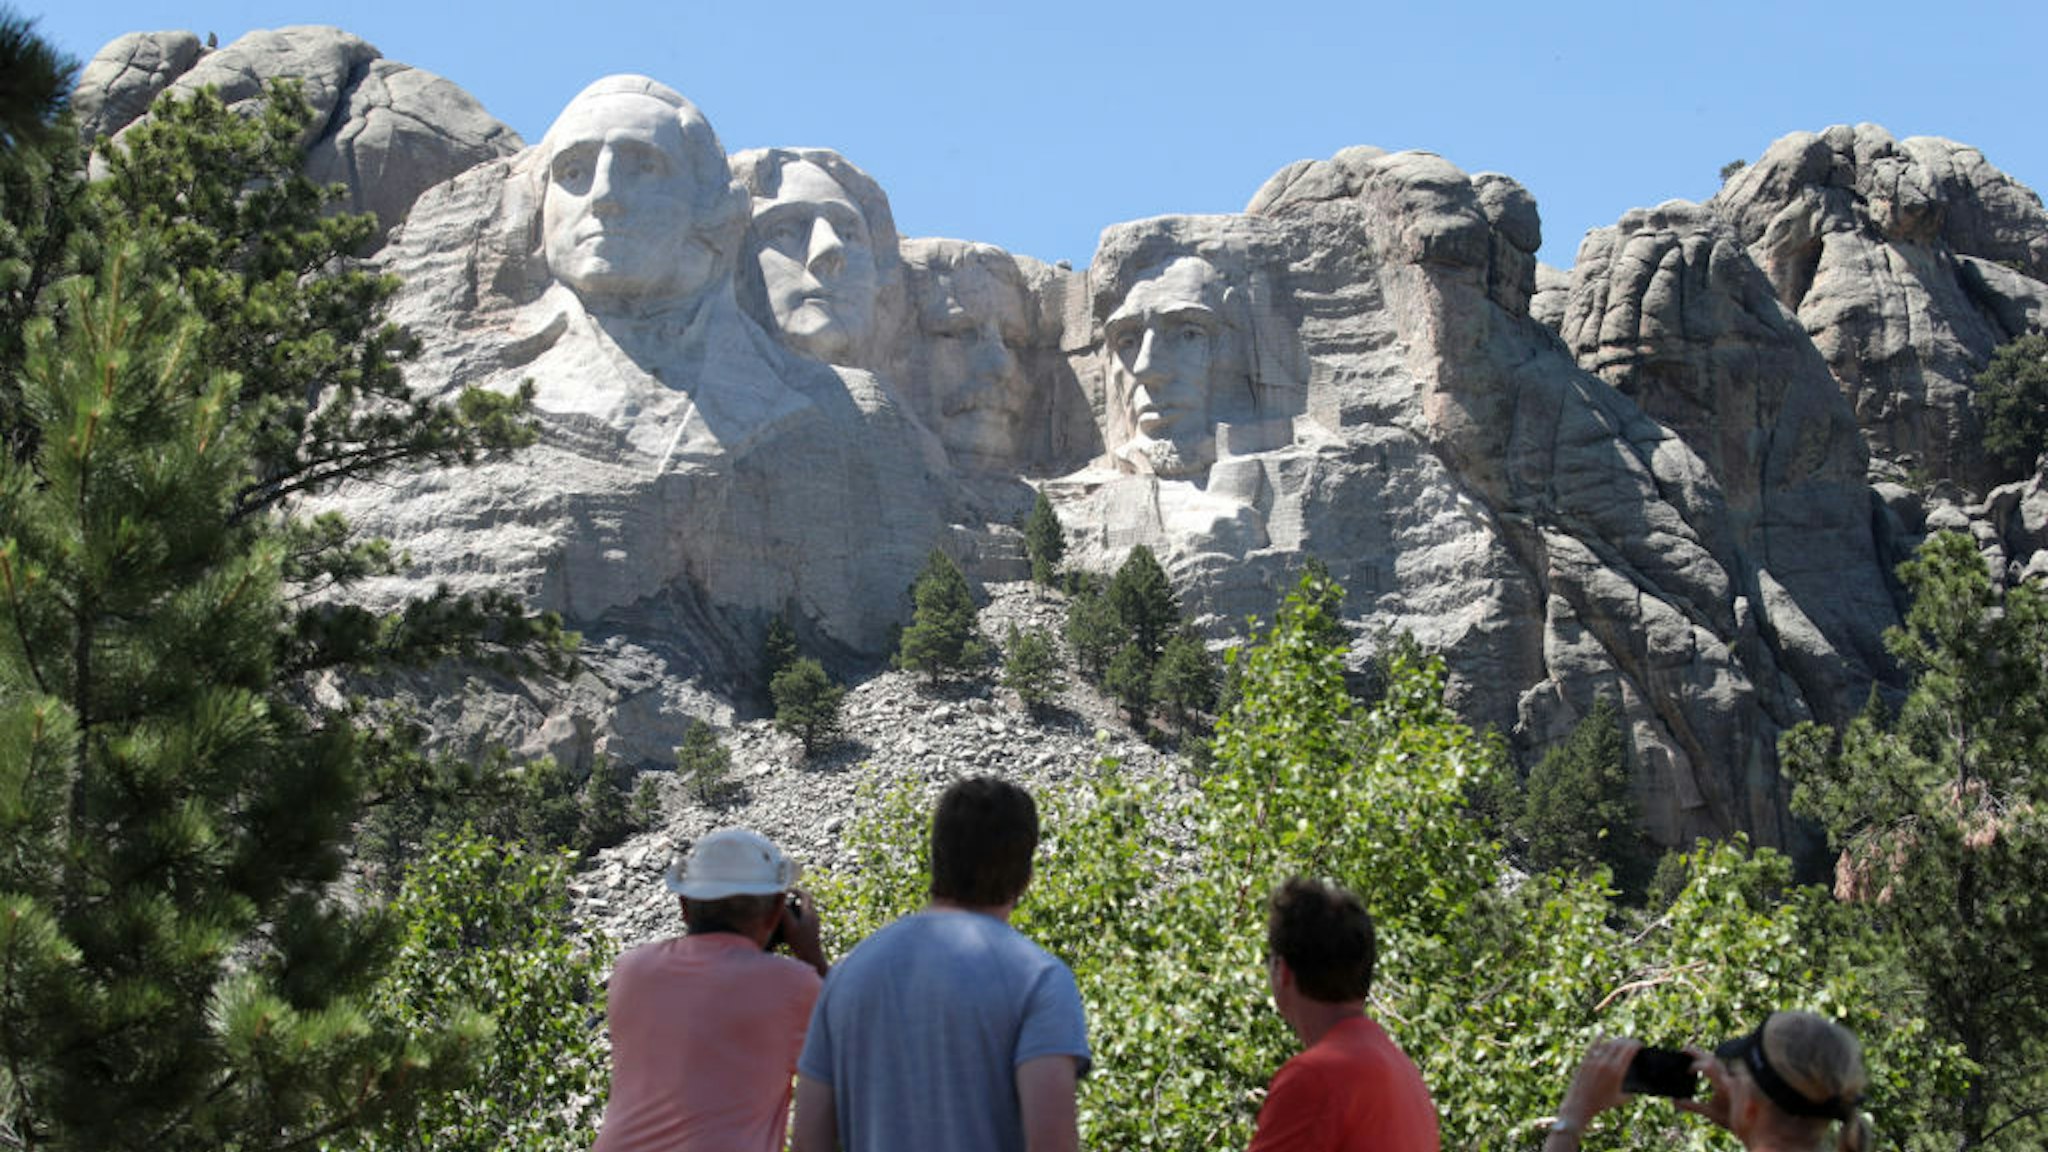 Tourists visit Mount Rushmore National Monument on July 01, 2020 in Keystone, South Dakota. President Donald Trump is expected to visit the monument and make remarks before the start of a fireworks display on July 3. (Photo by Scott Olson/Getty Images)